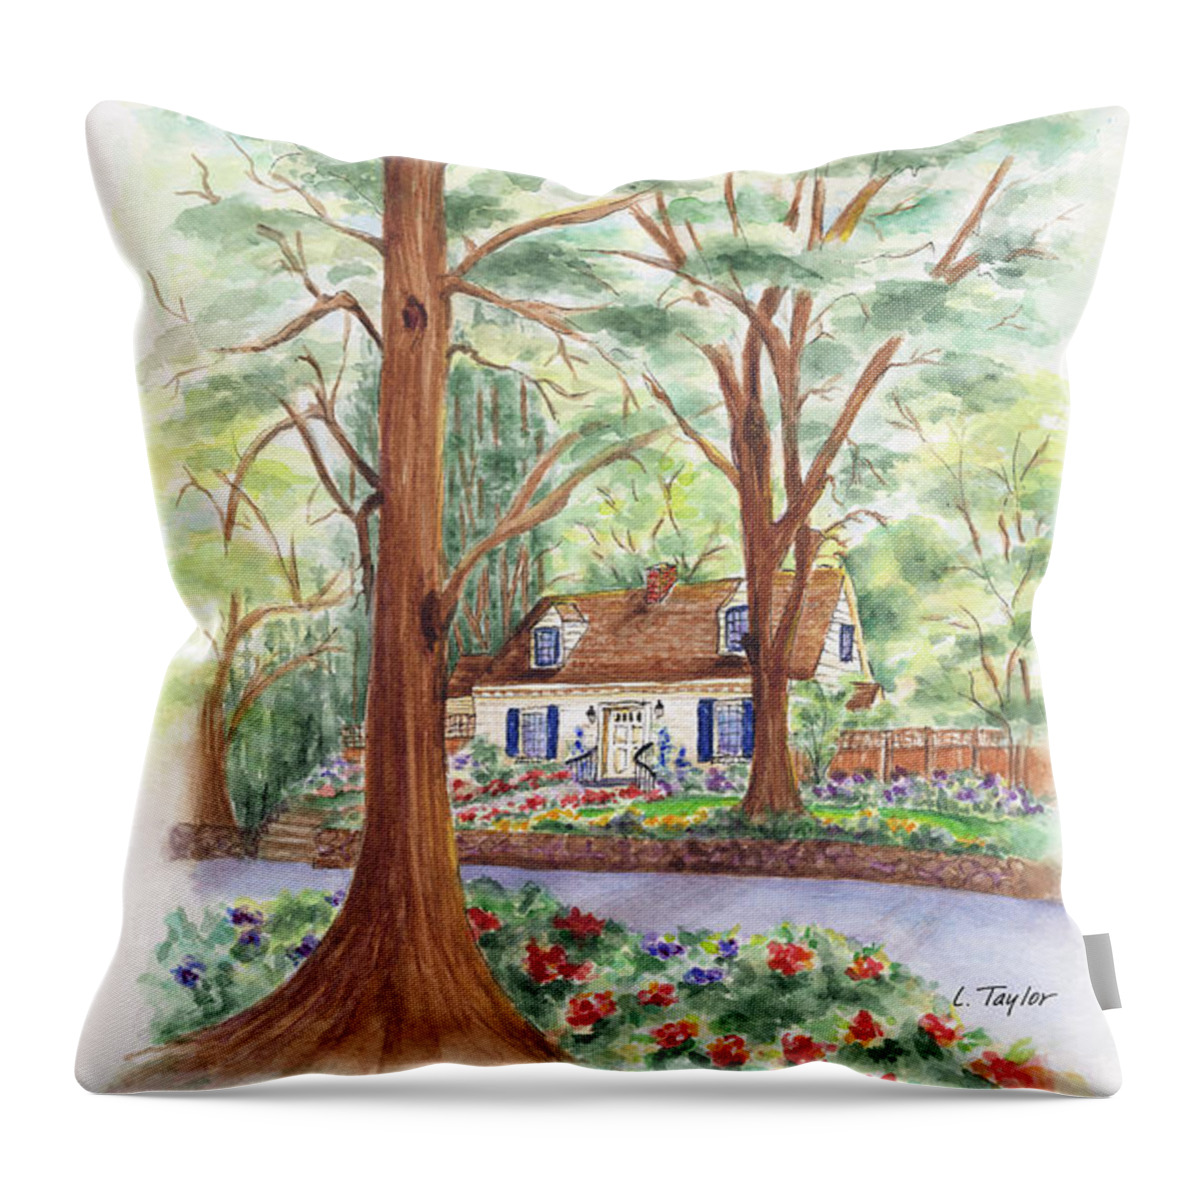 Cottage In Woods Throw Pillow featuring the painting Main Street Charmer by Lori Taylor